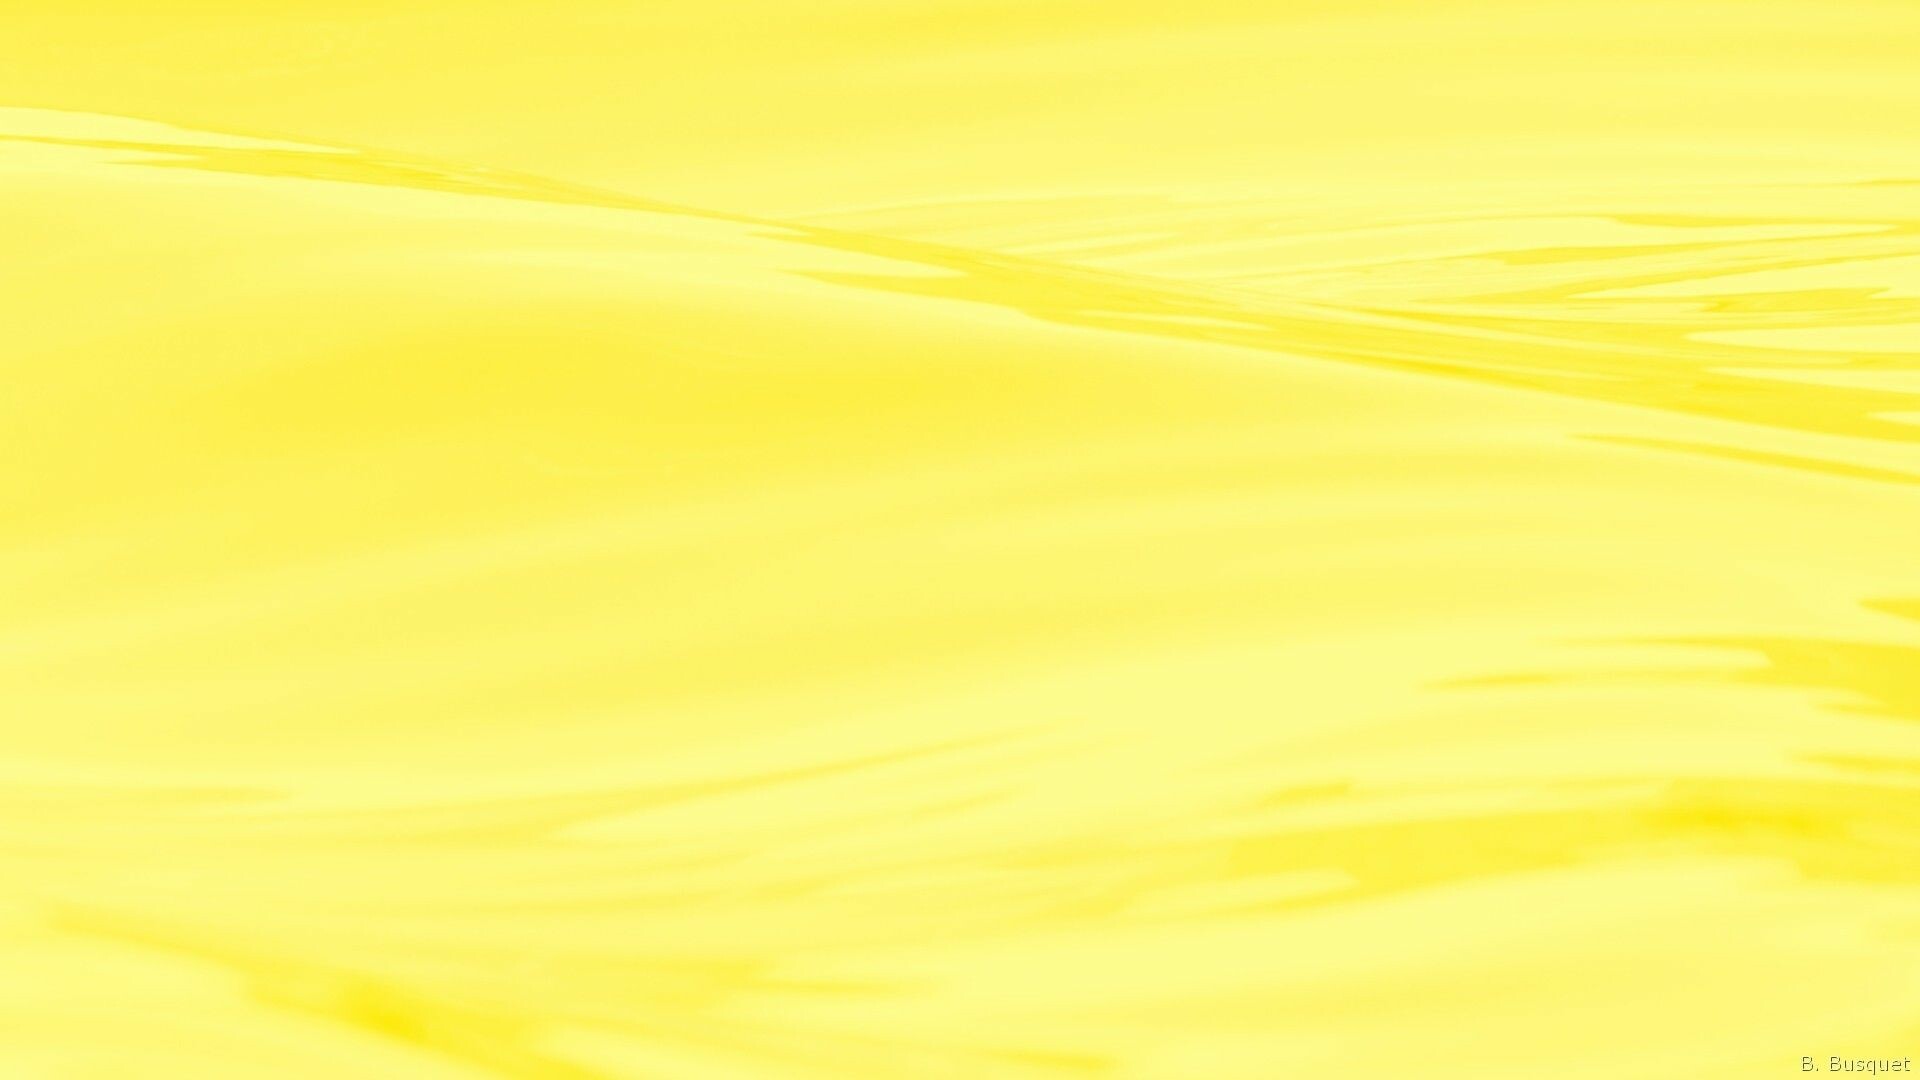 50+ Yellow Aesthetic Desktop Wallpapers: HD, 4K, 5K for PC and Mobile |  Download free images for iPhone, Android